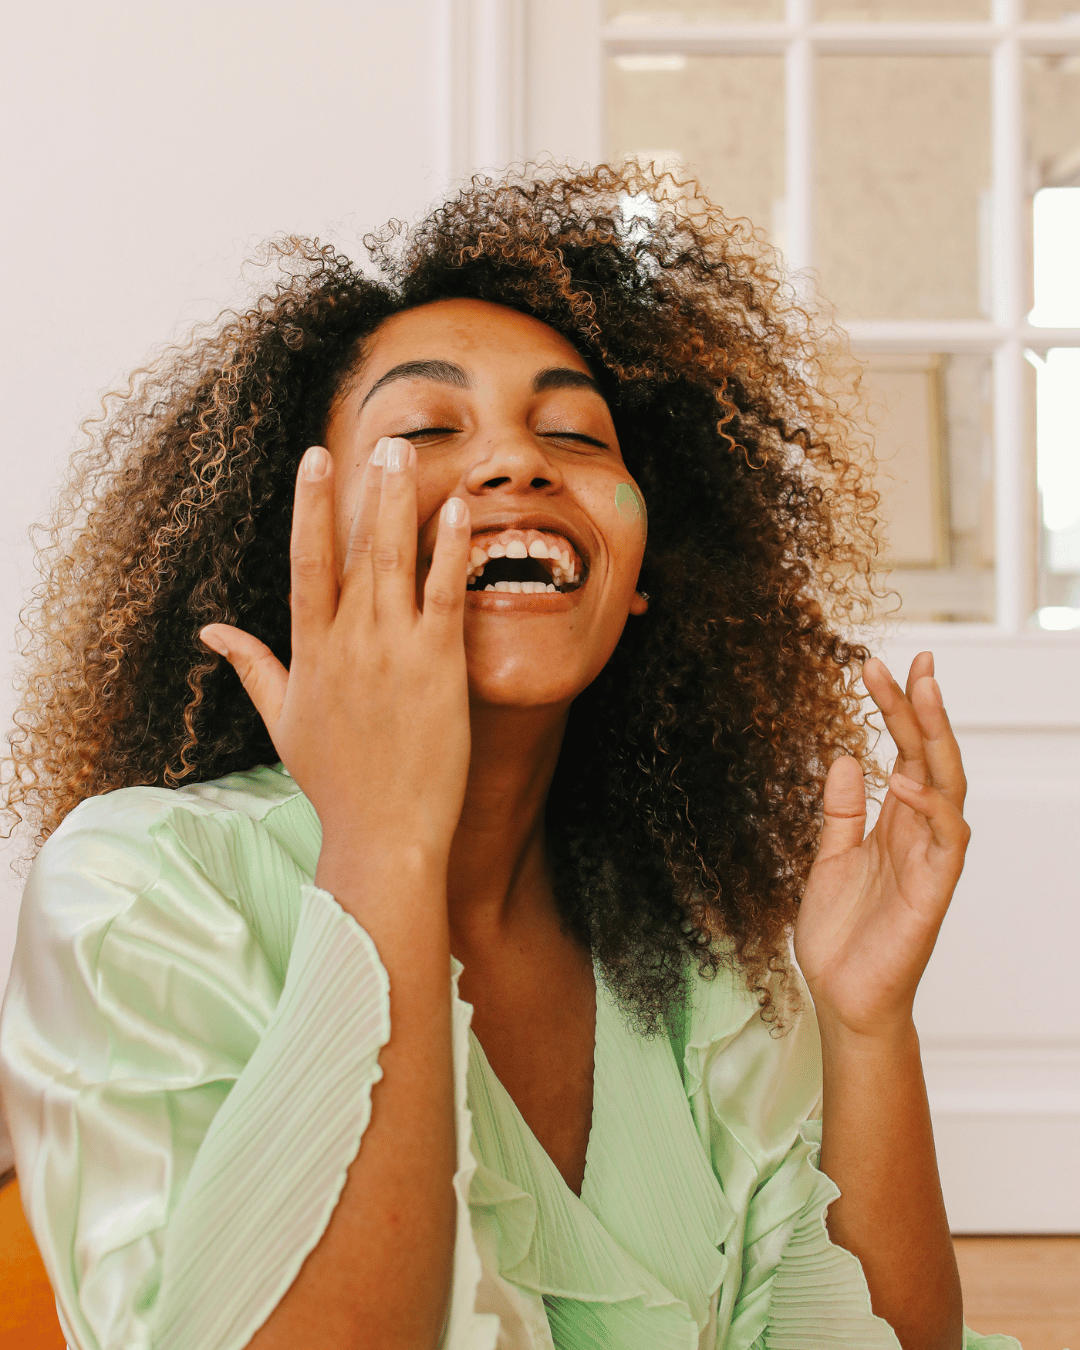 black woman touching her face and smiling